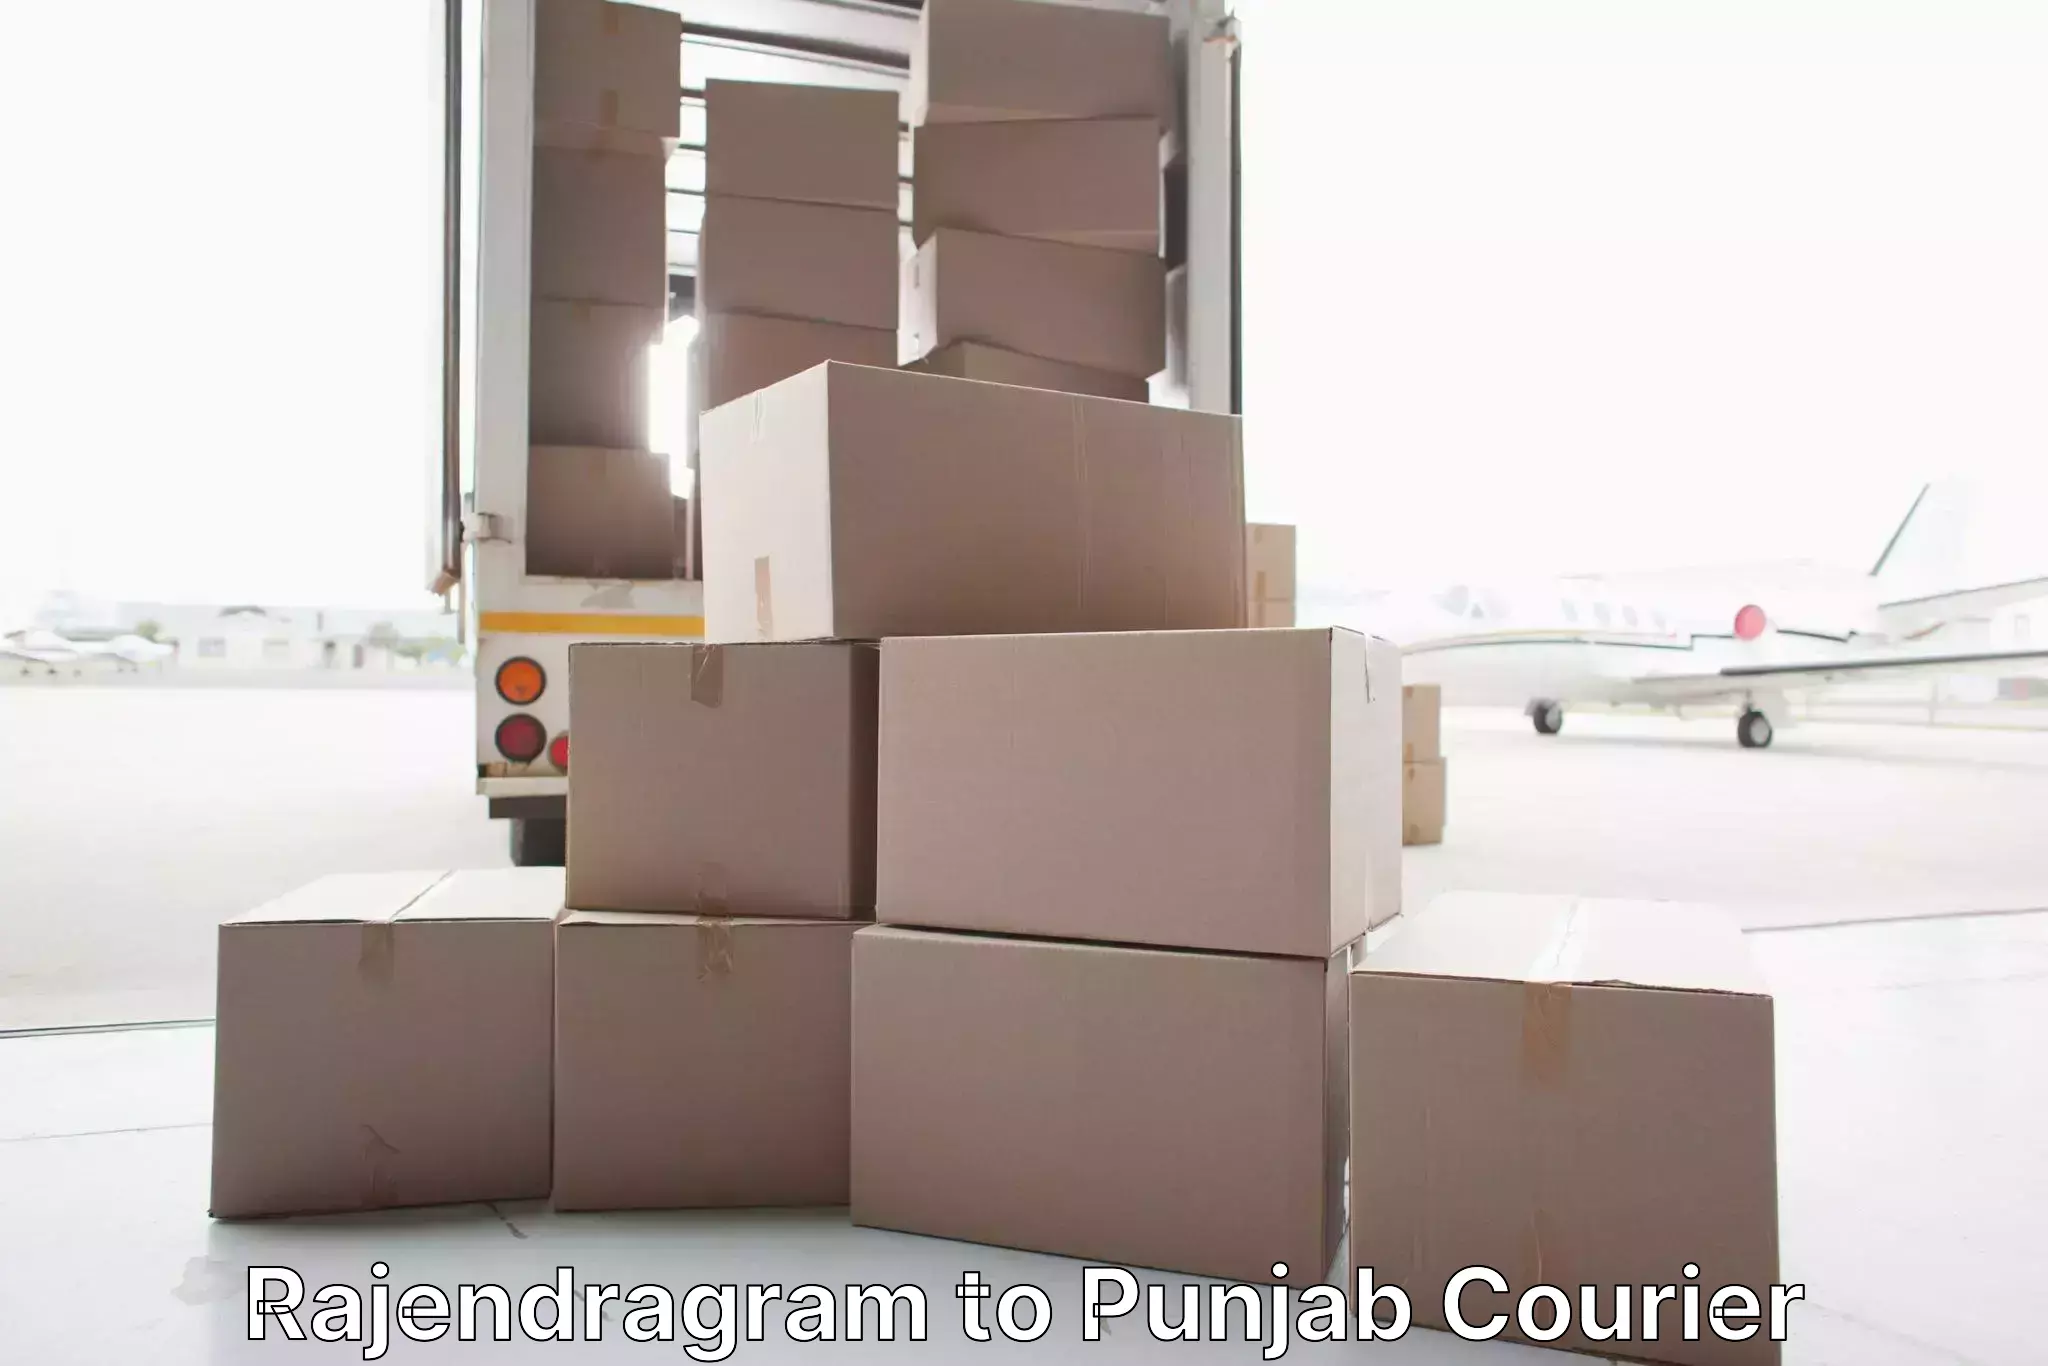 Quality moving and storage in Rajendragram to Punjab